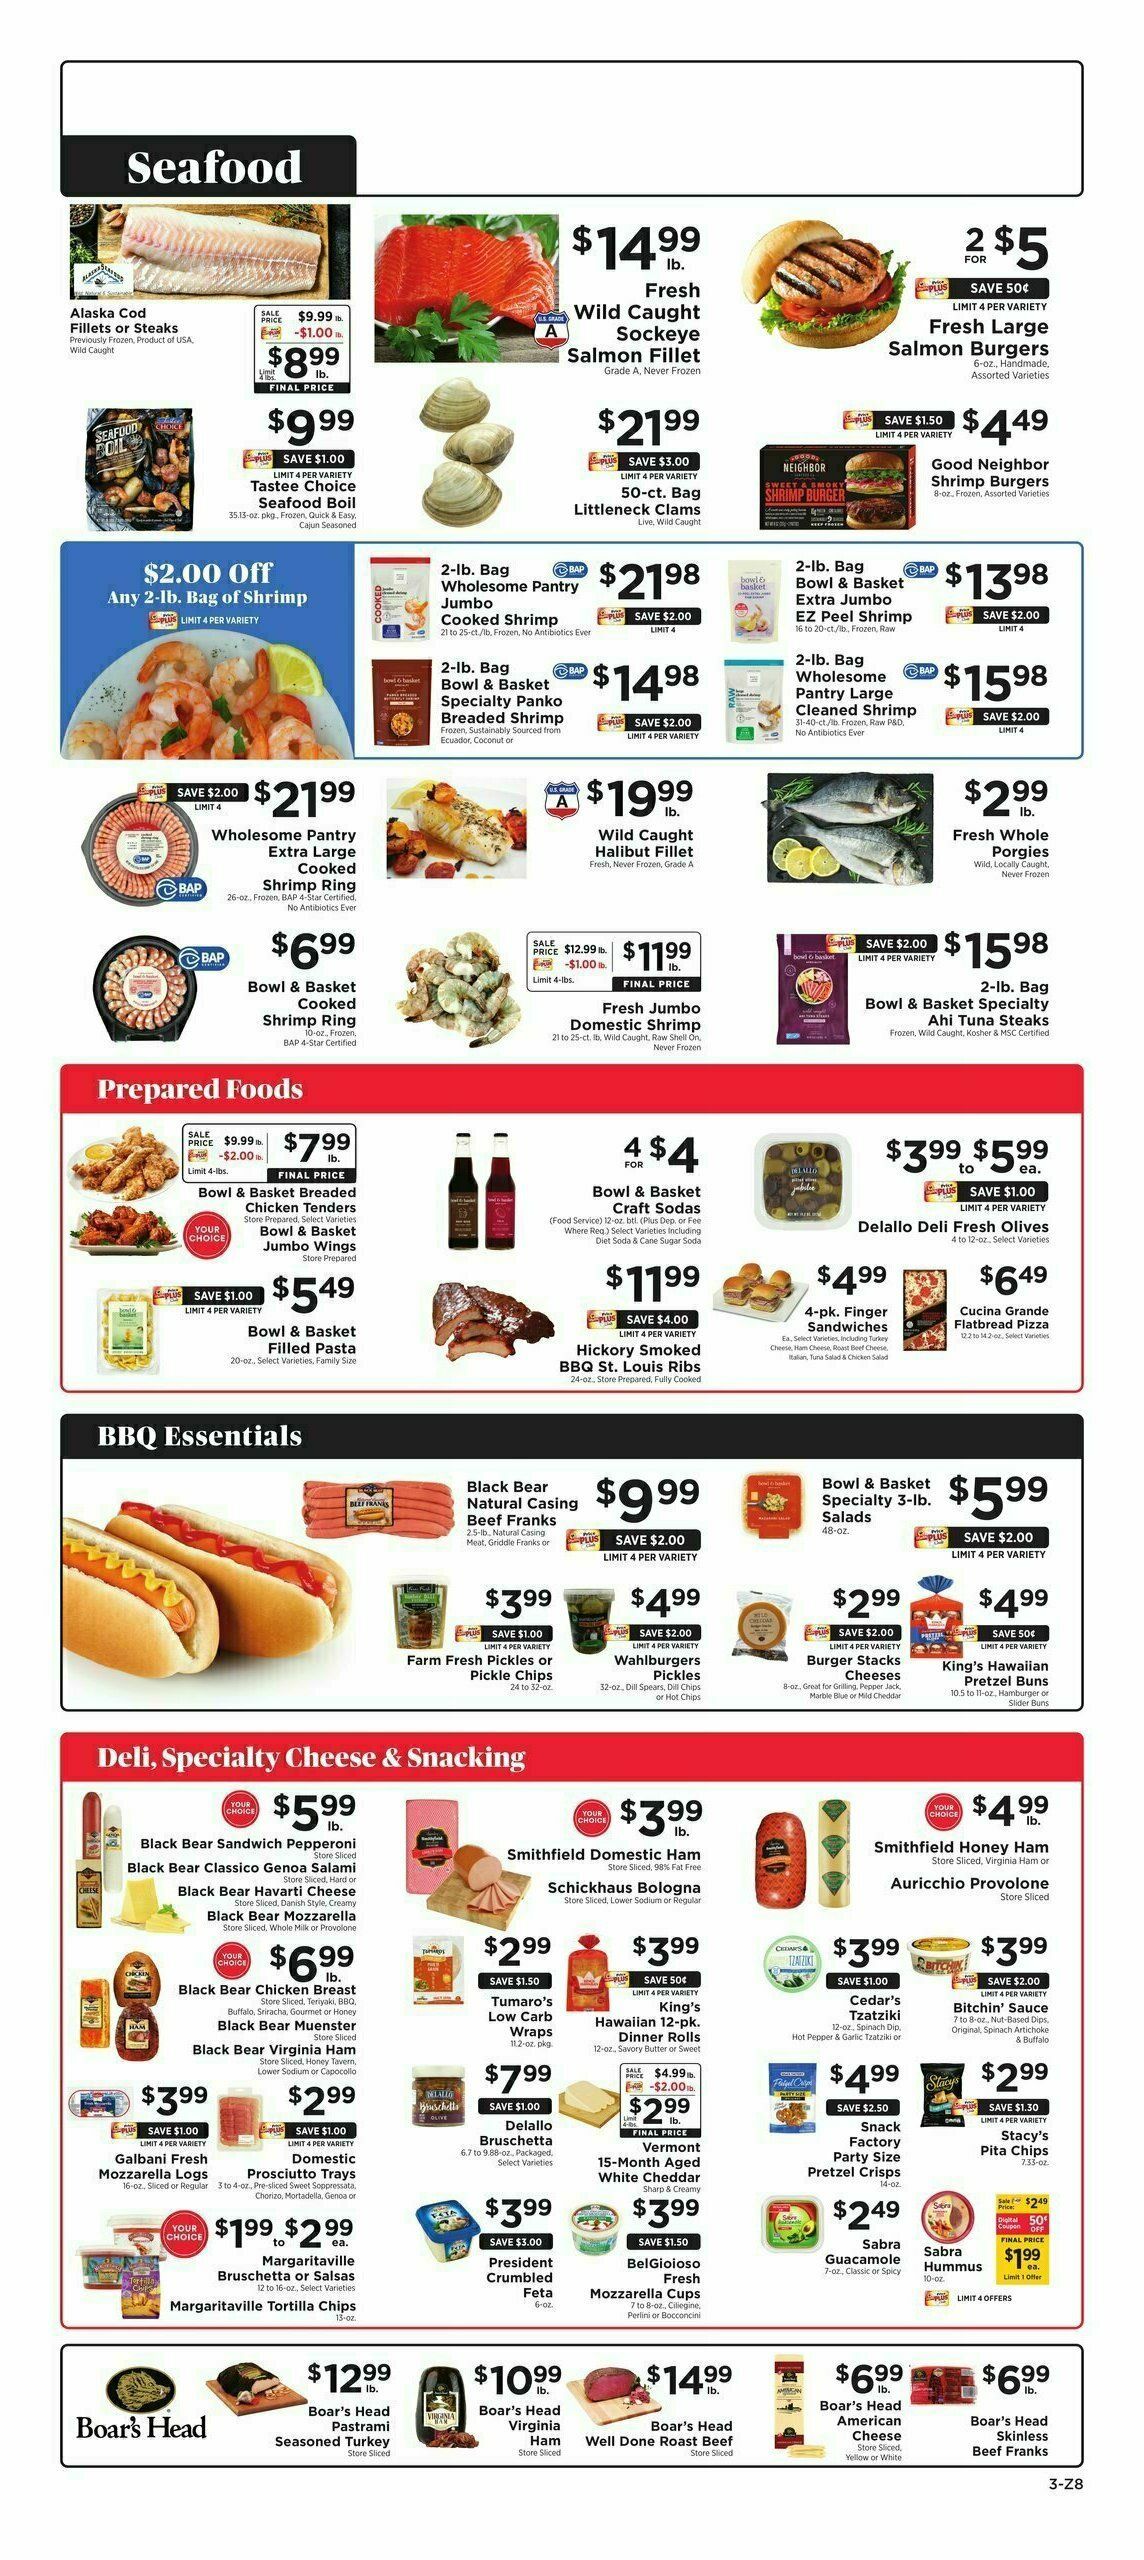 ShopRite Weekly Ad from June 30